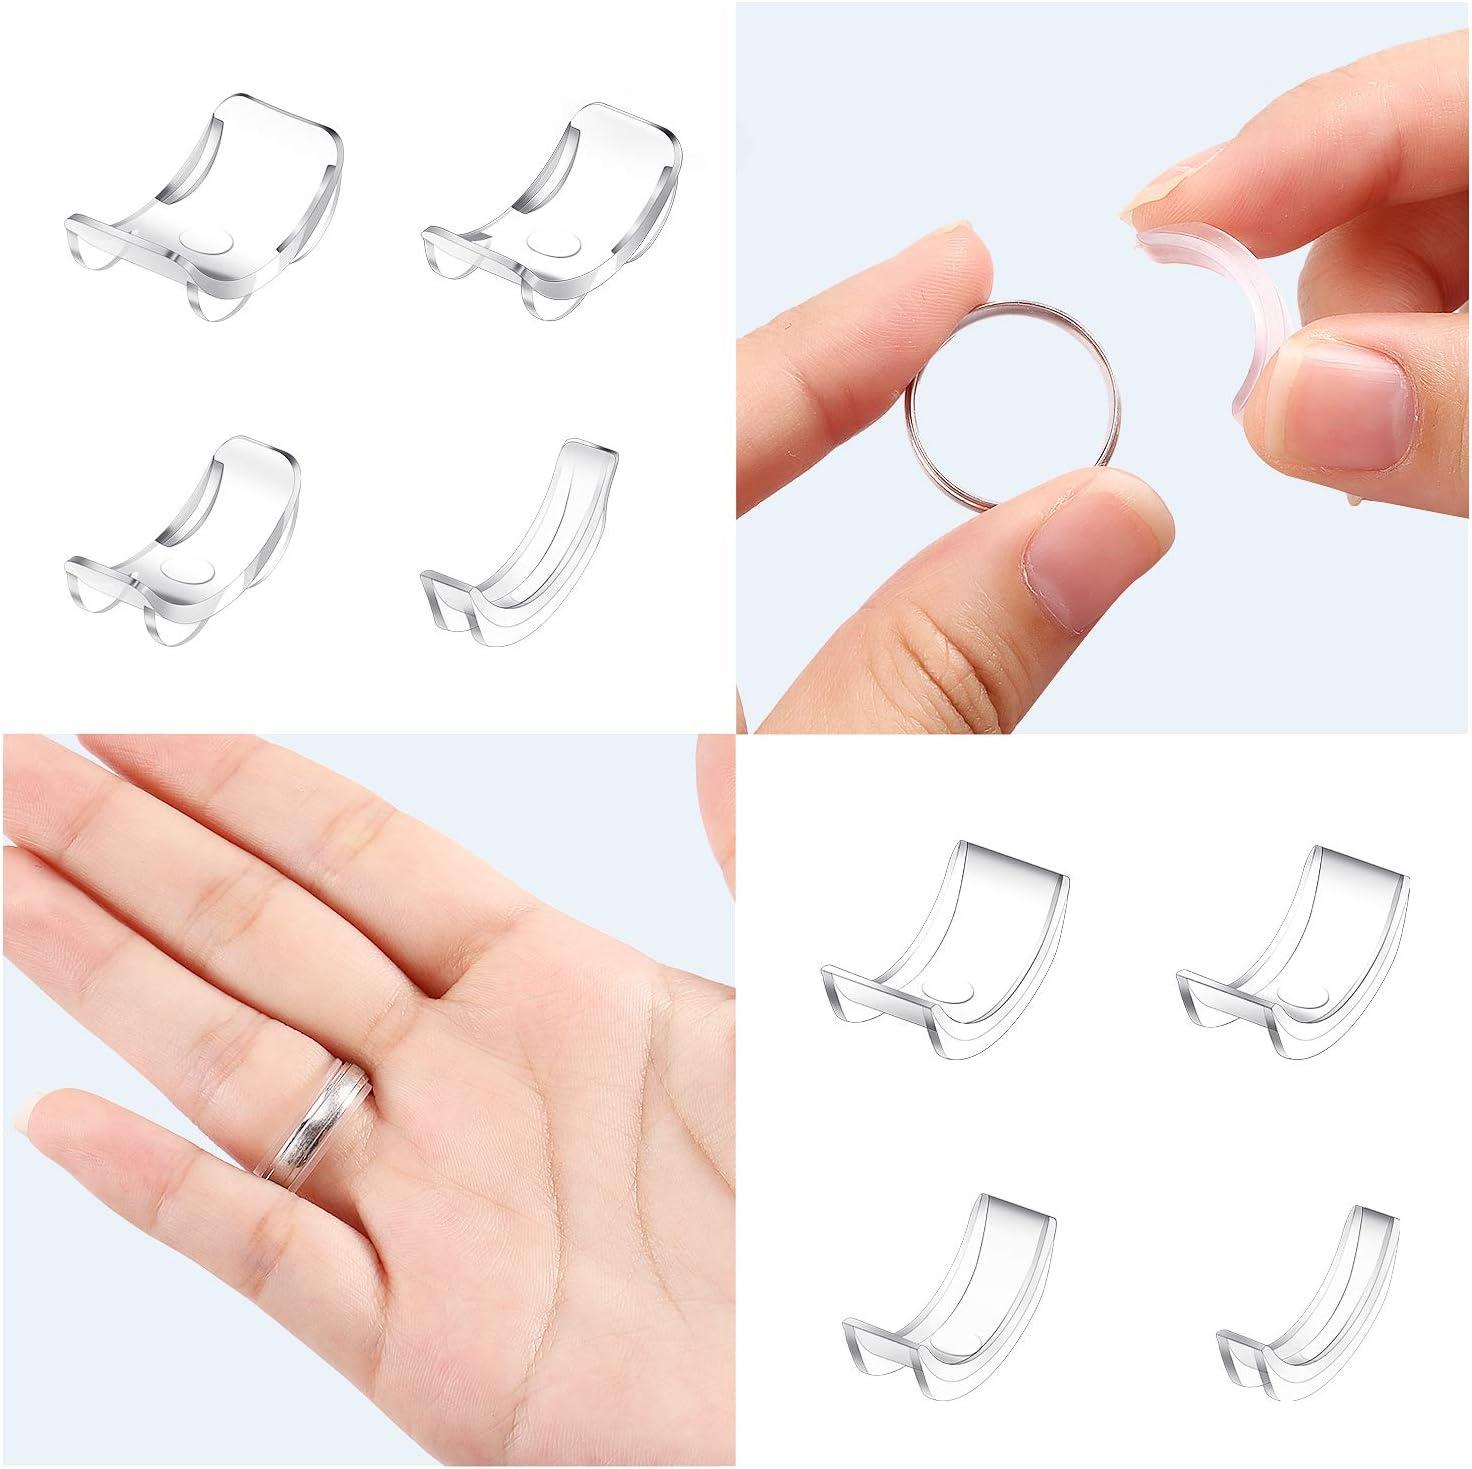 8 Sizes Silicone Invisible Ring Size Reducer Adjuster Ring Sizer Fit Any  Rings